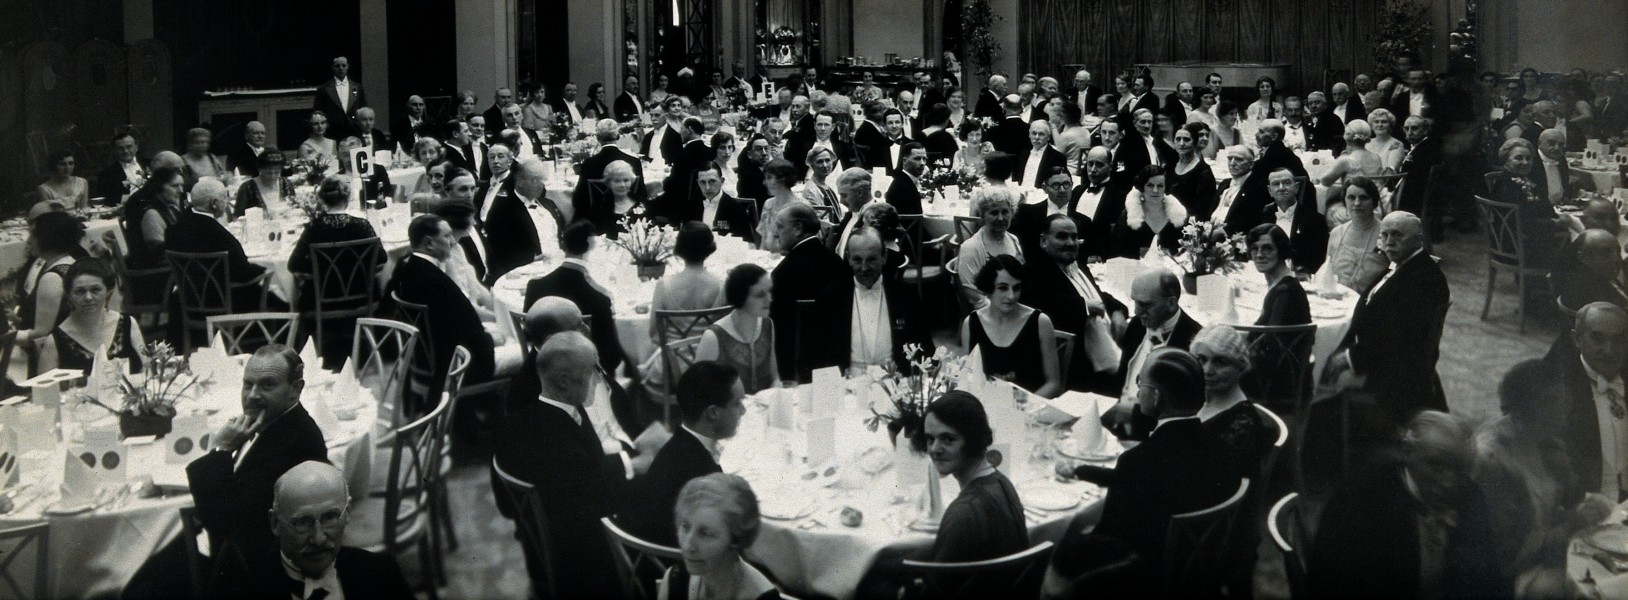 African Society dinner. Photograph by Swaine, 1931. Wellcome V0027800